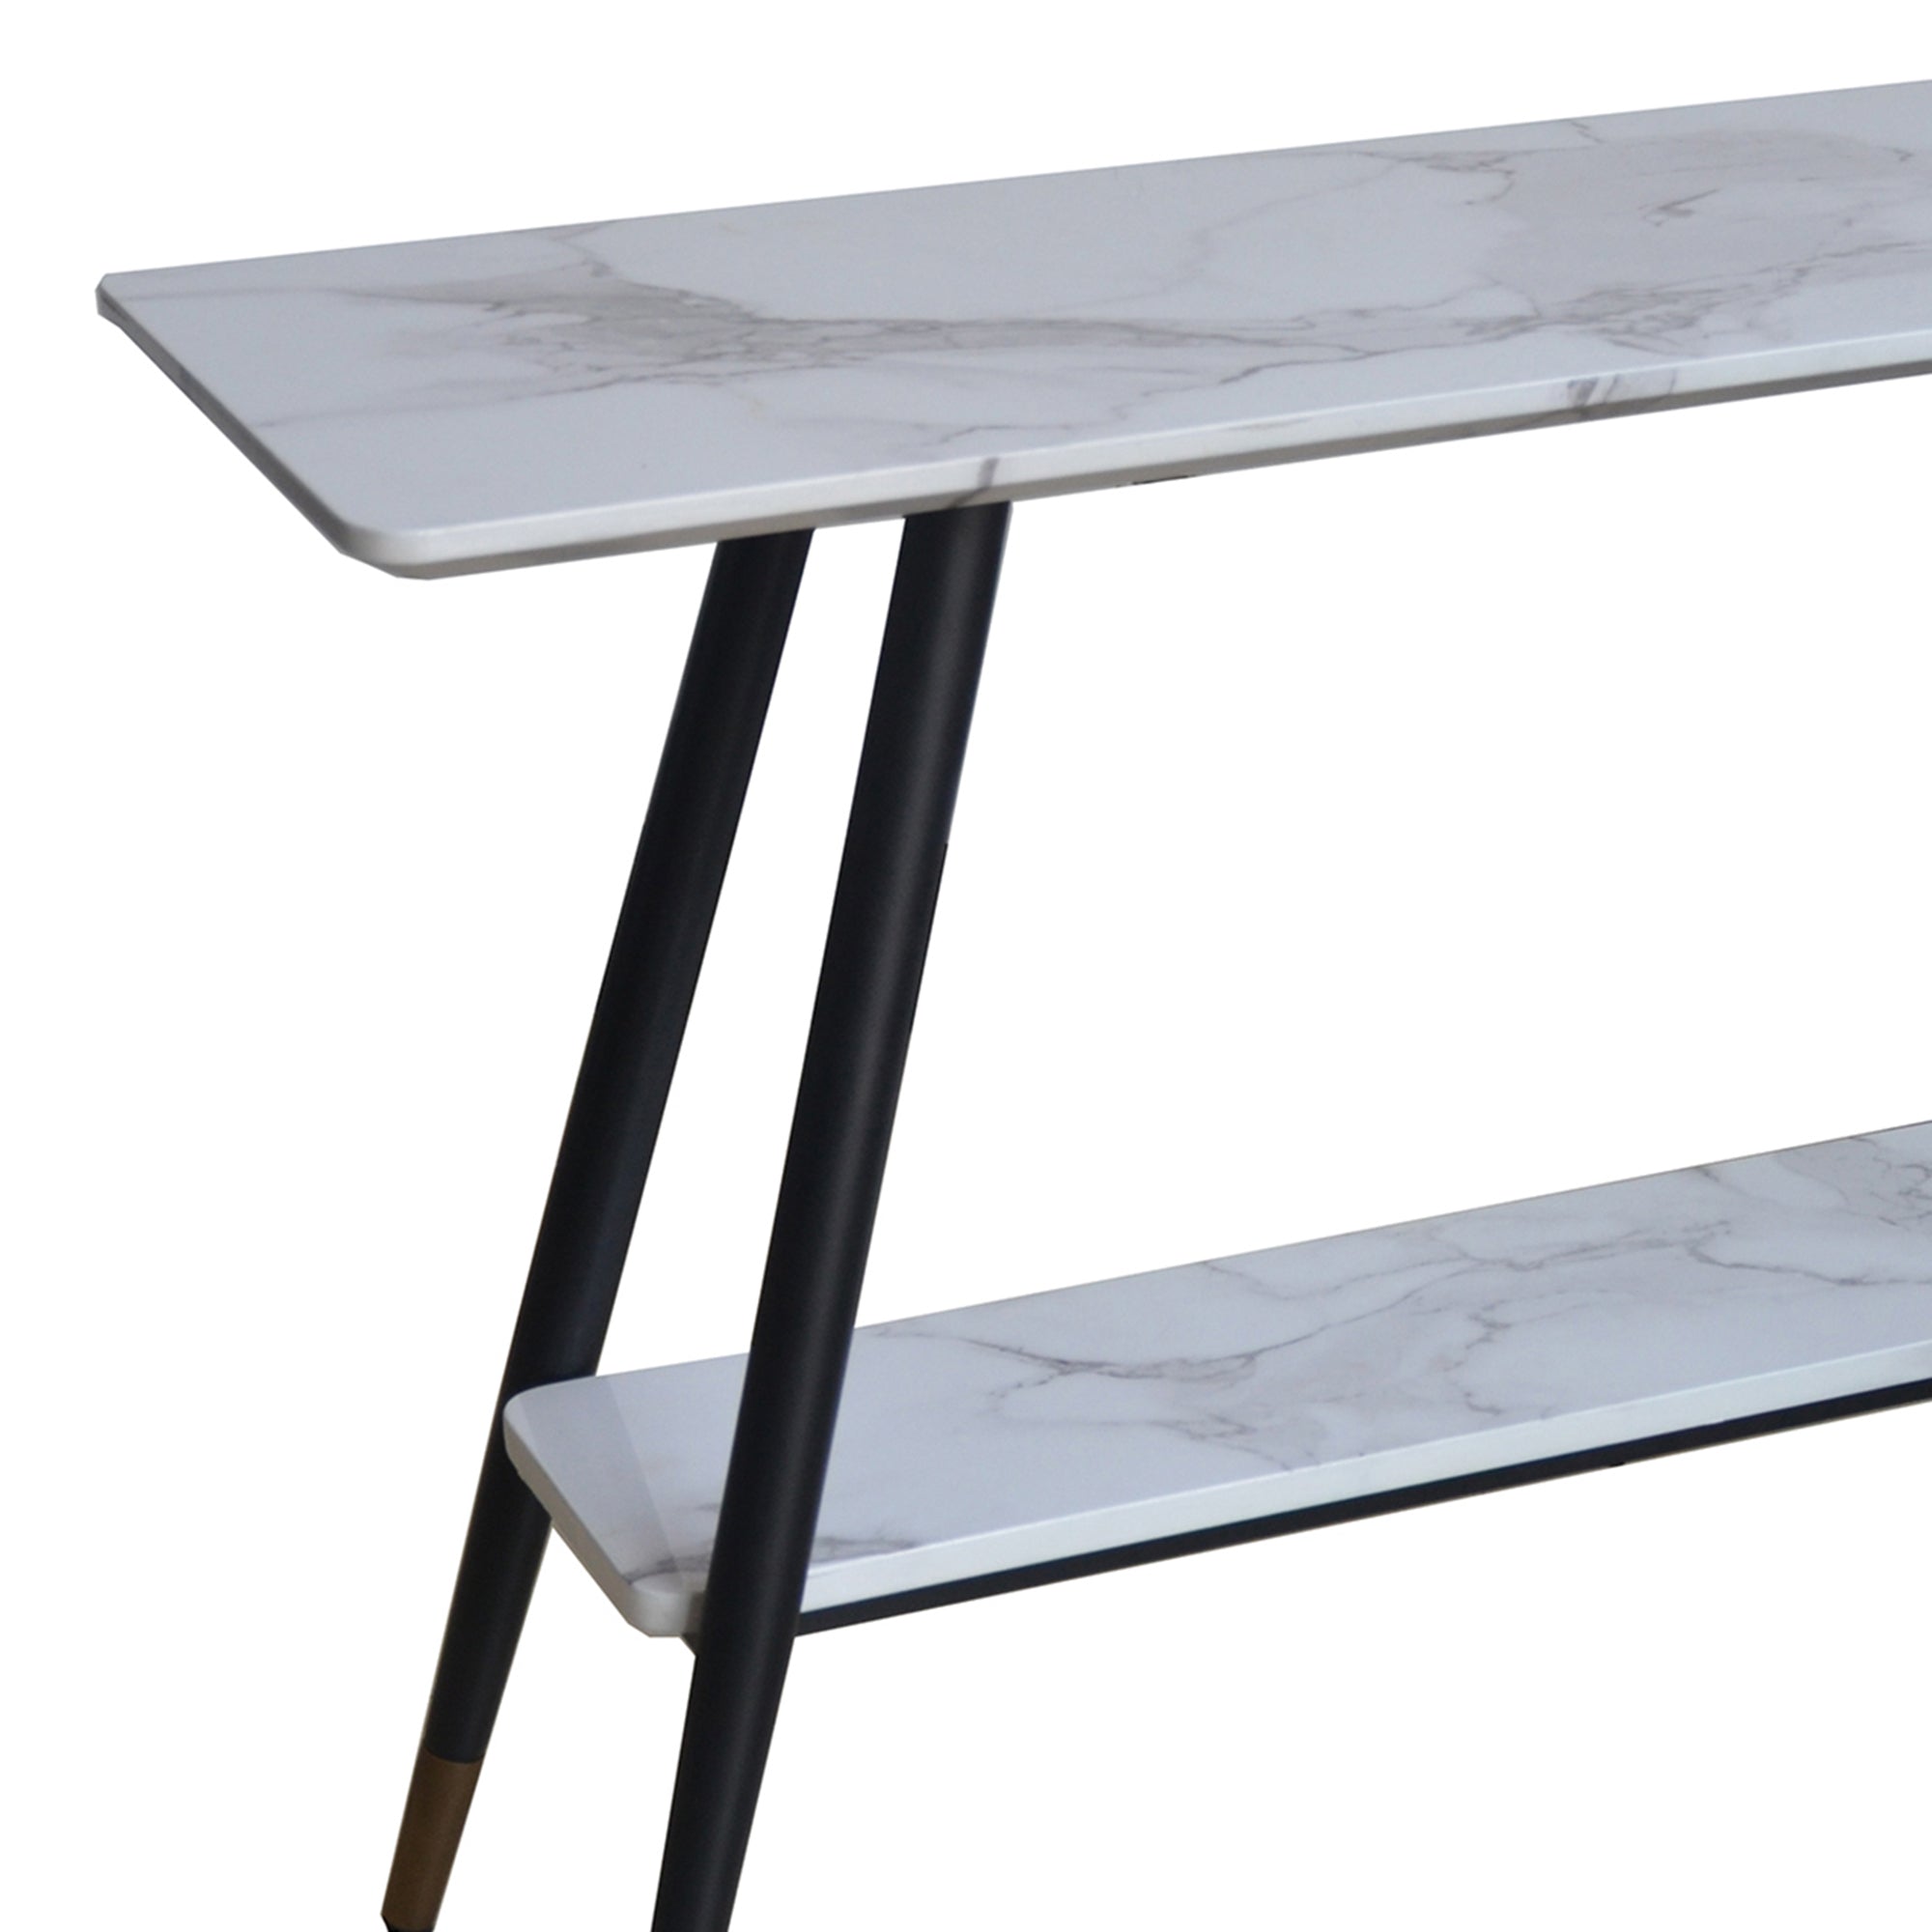 EMERY-2TIER CONSOLE TABLE-WHITE